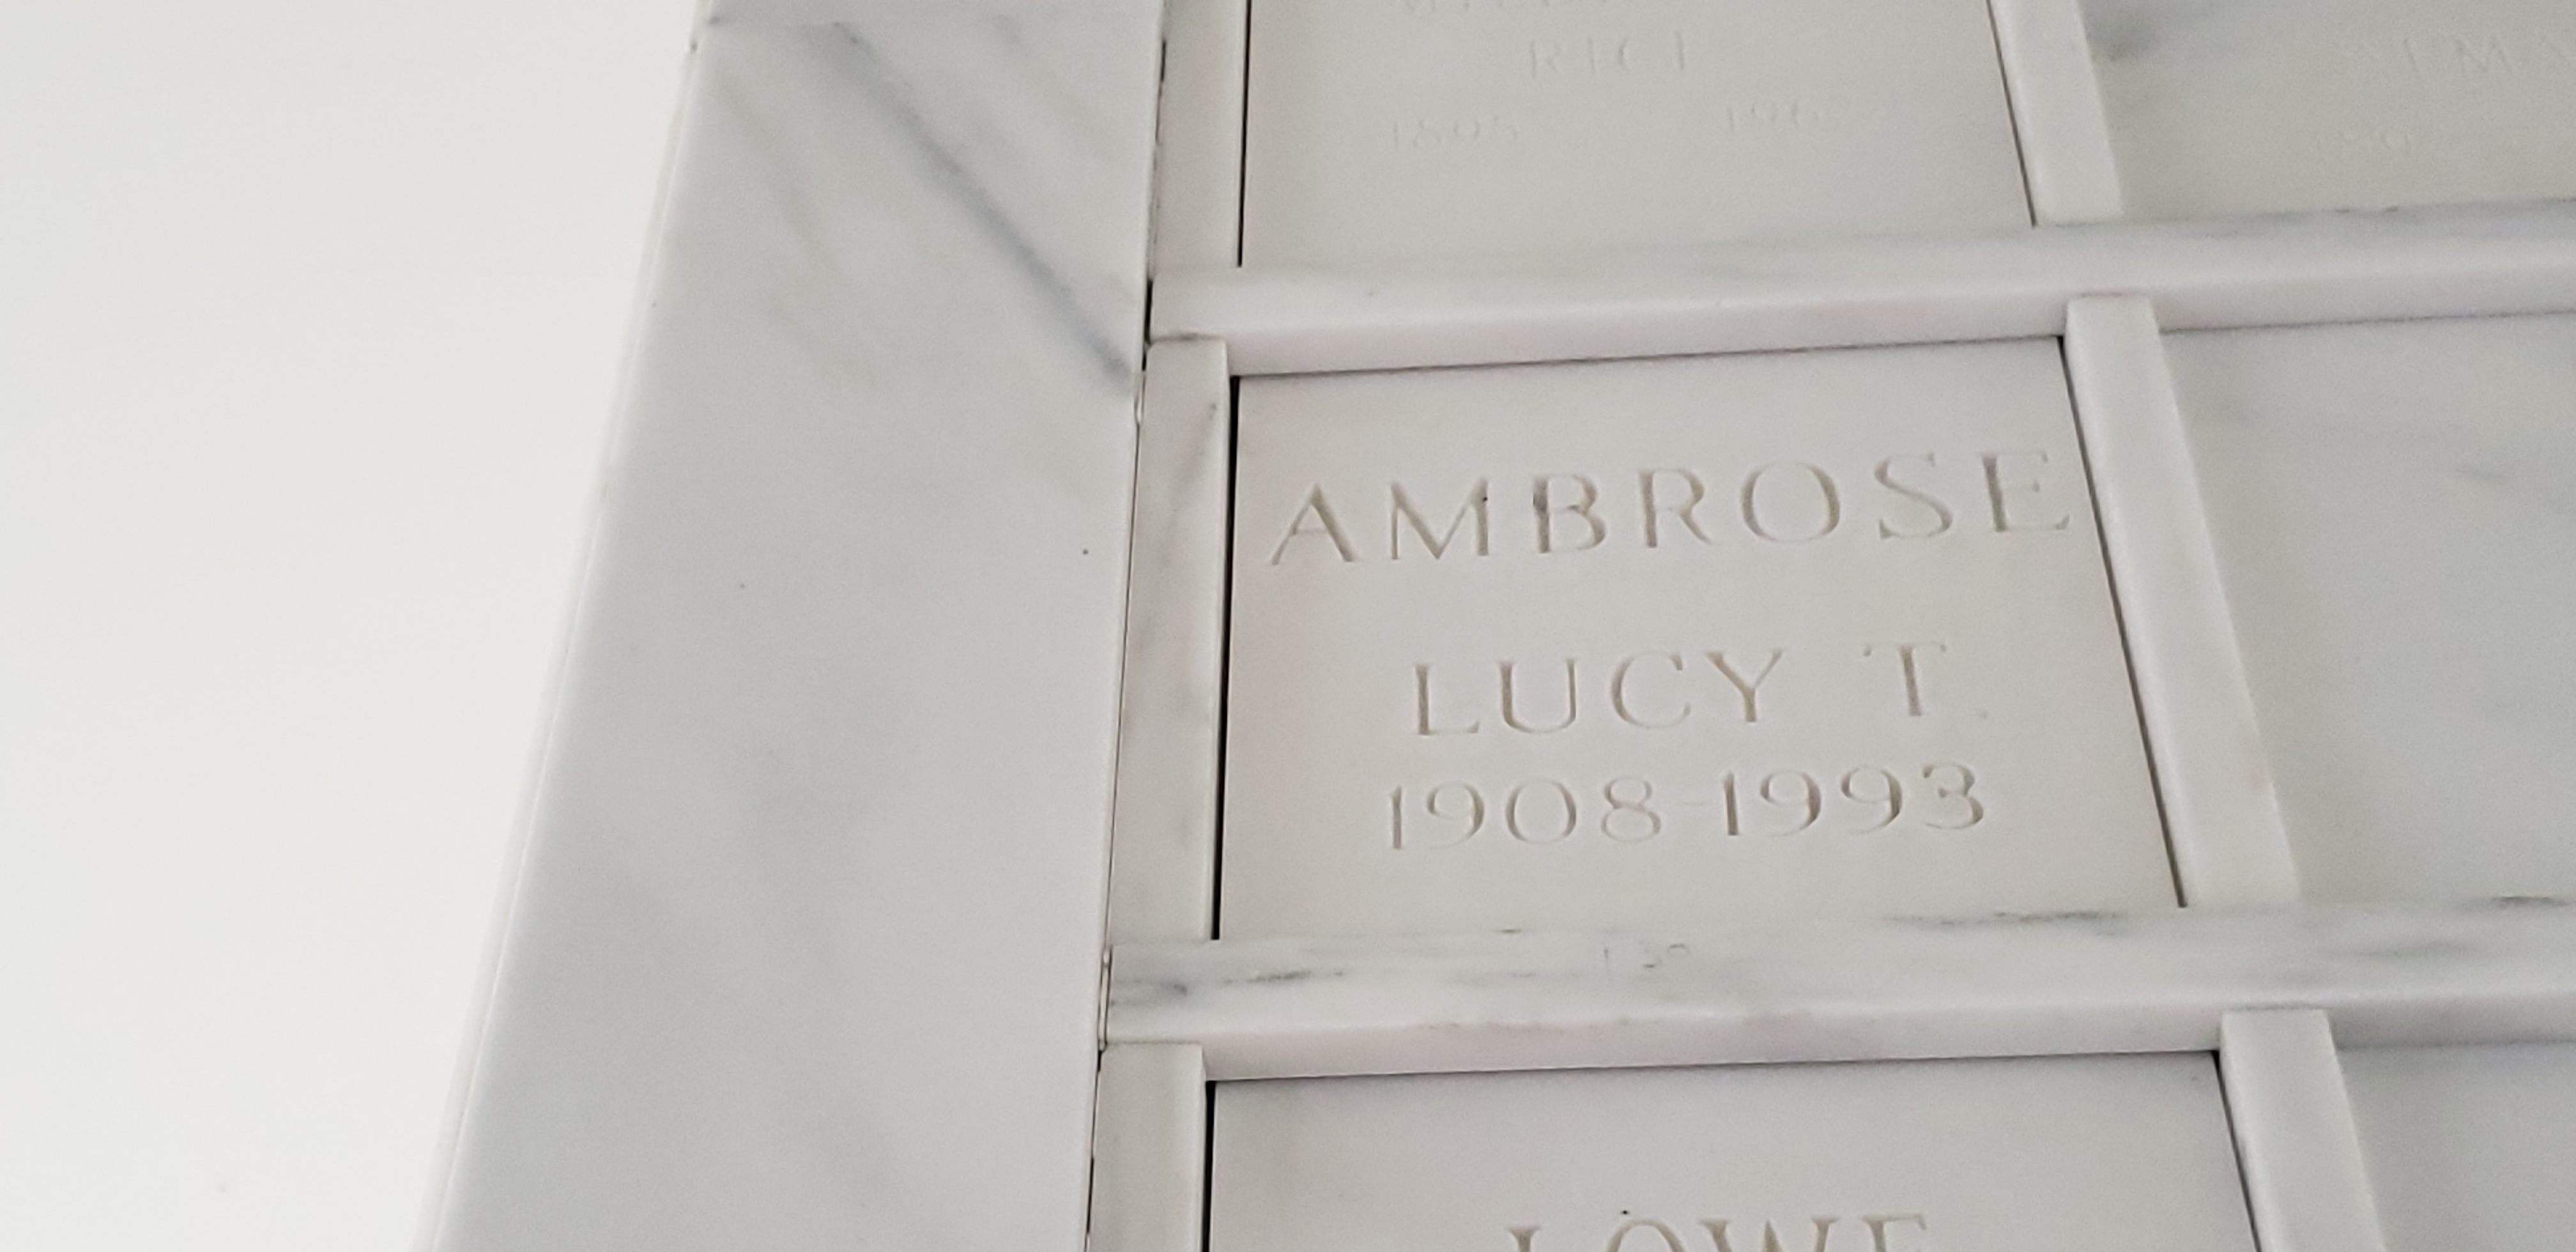 Lucy T Ambrose